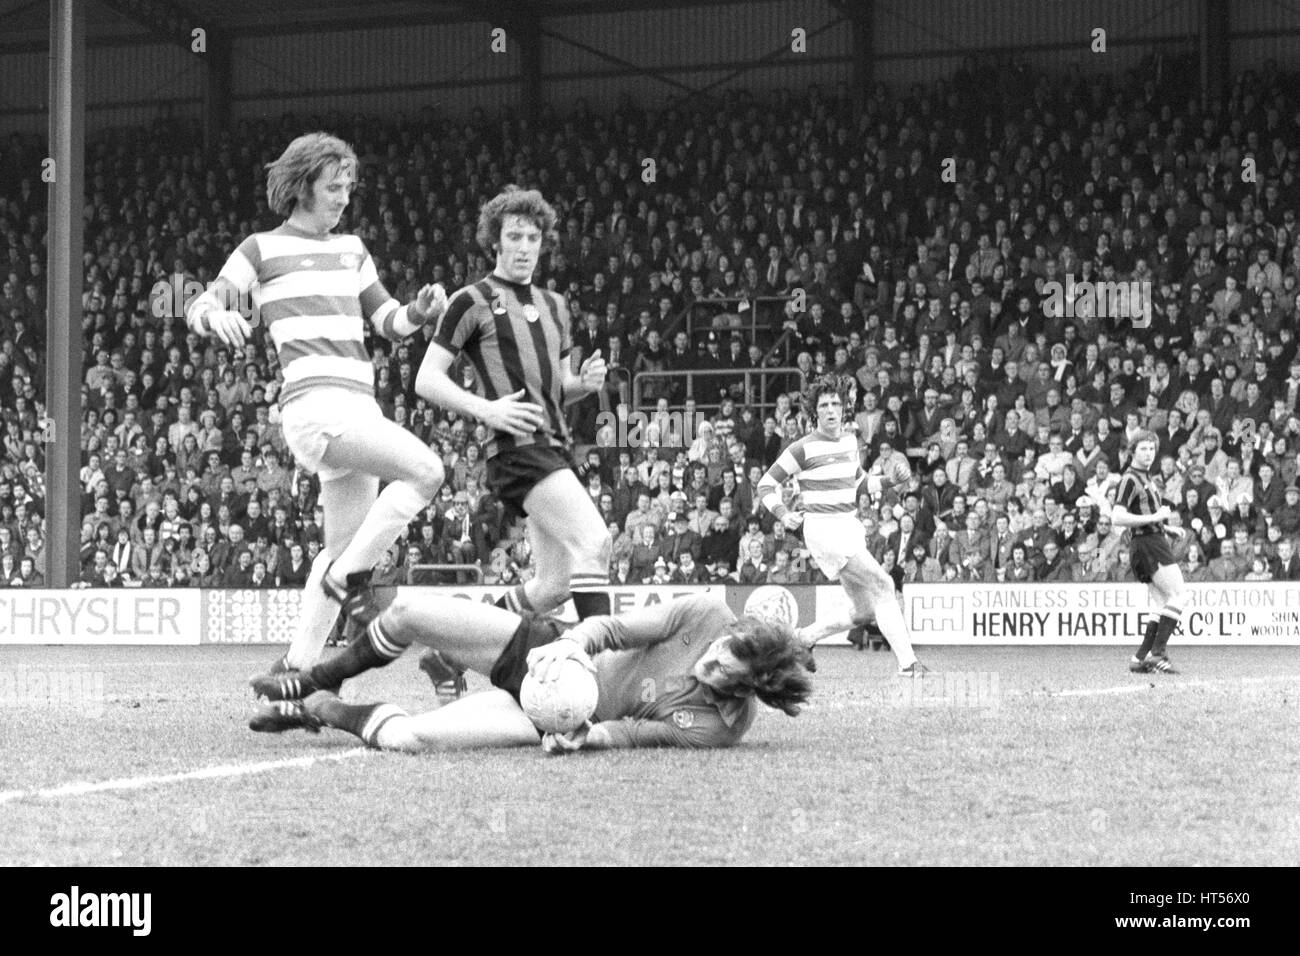 Manchester City goalkeeper Joe Corrigan gets a safe hold on the ball as he clutches it from the feet of QPR striker Stan Bowles, during this afternoon's League Division One match at Loftus Road. The City player in the centre is Tommy Booth. An 81st minute header from Dave Webb clinched victory for the home side. Stock Photo